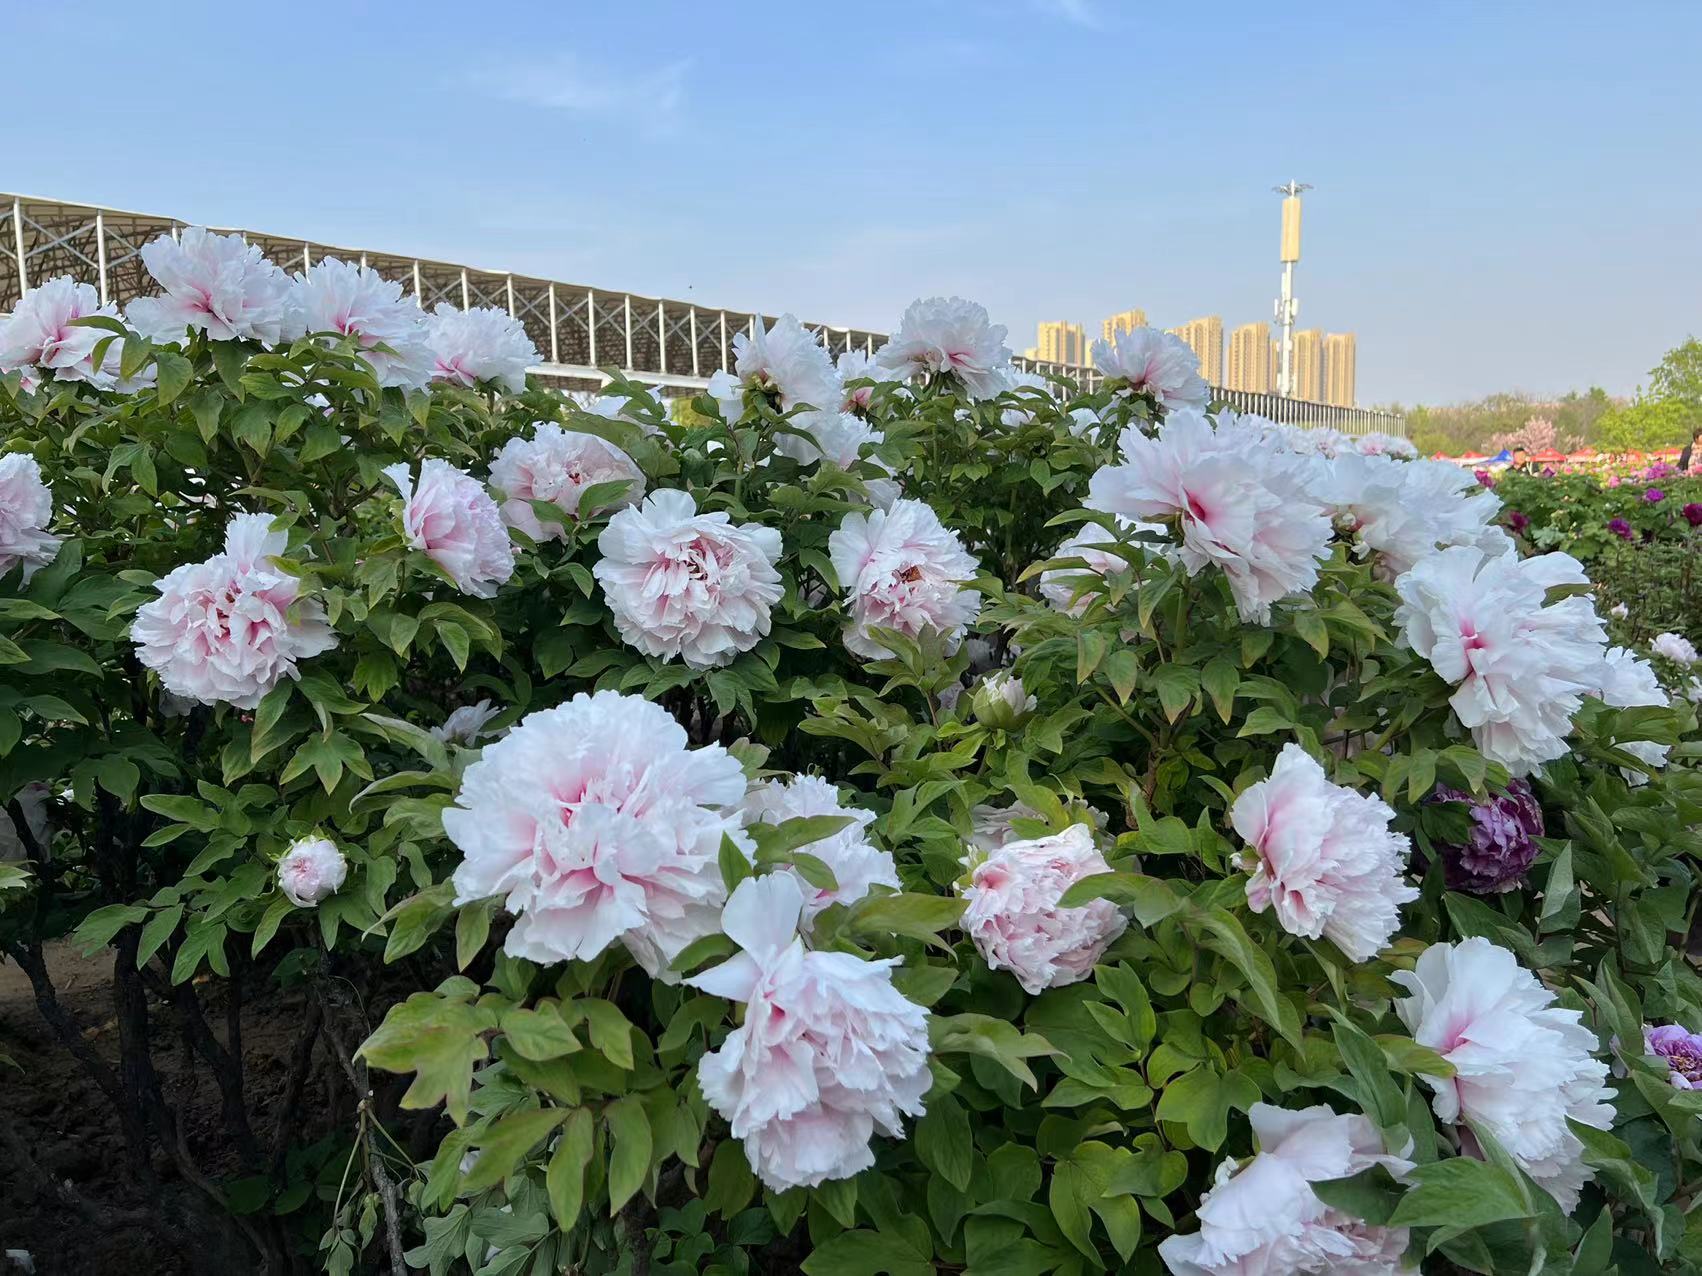 Blooming peonies in China's peony capital of Heze in Shandong Province, April 8, 2023. /CGTN